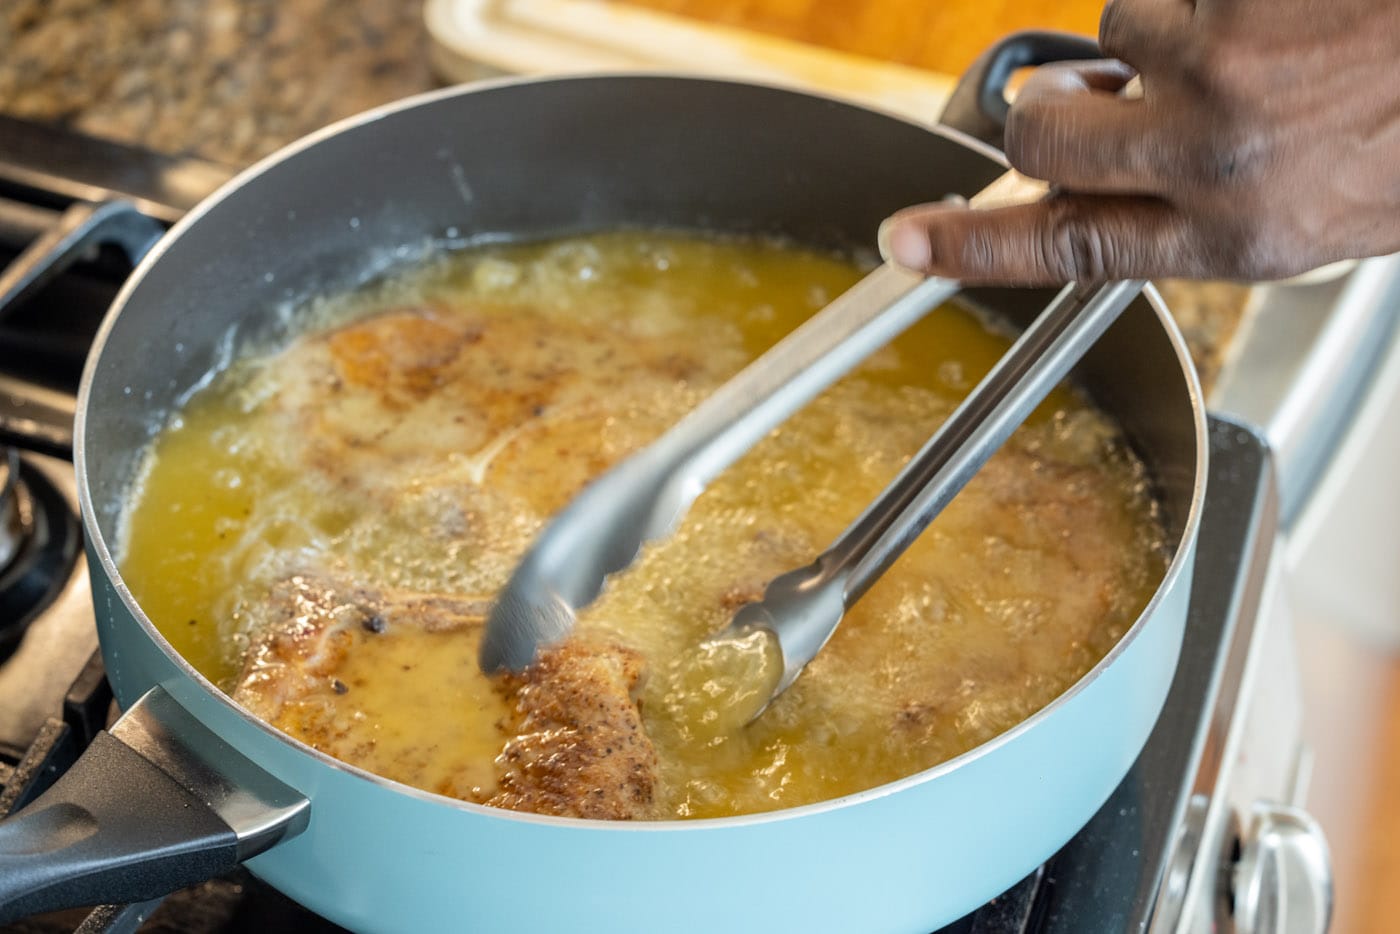 tongs flipping fried pork chops in a skillet